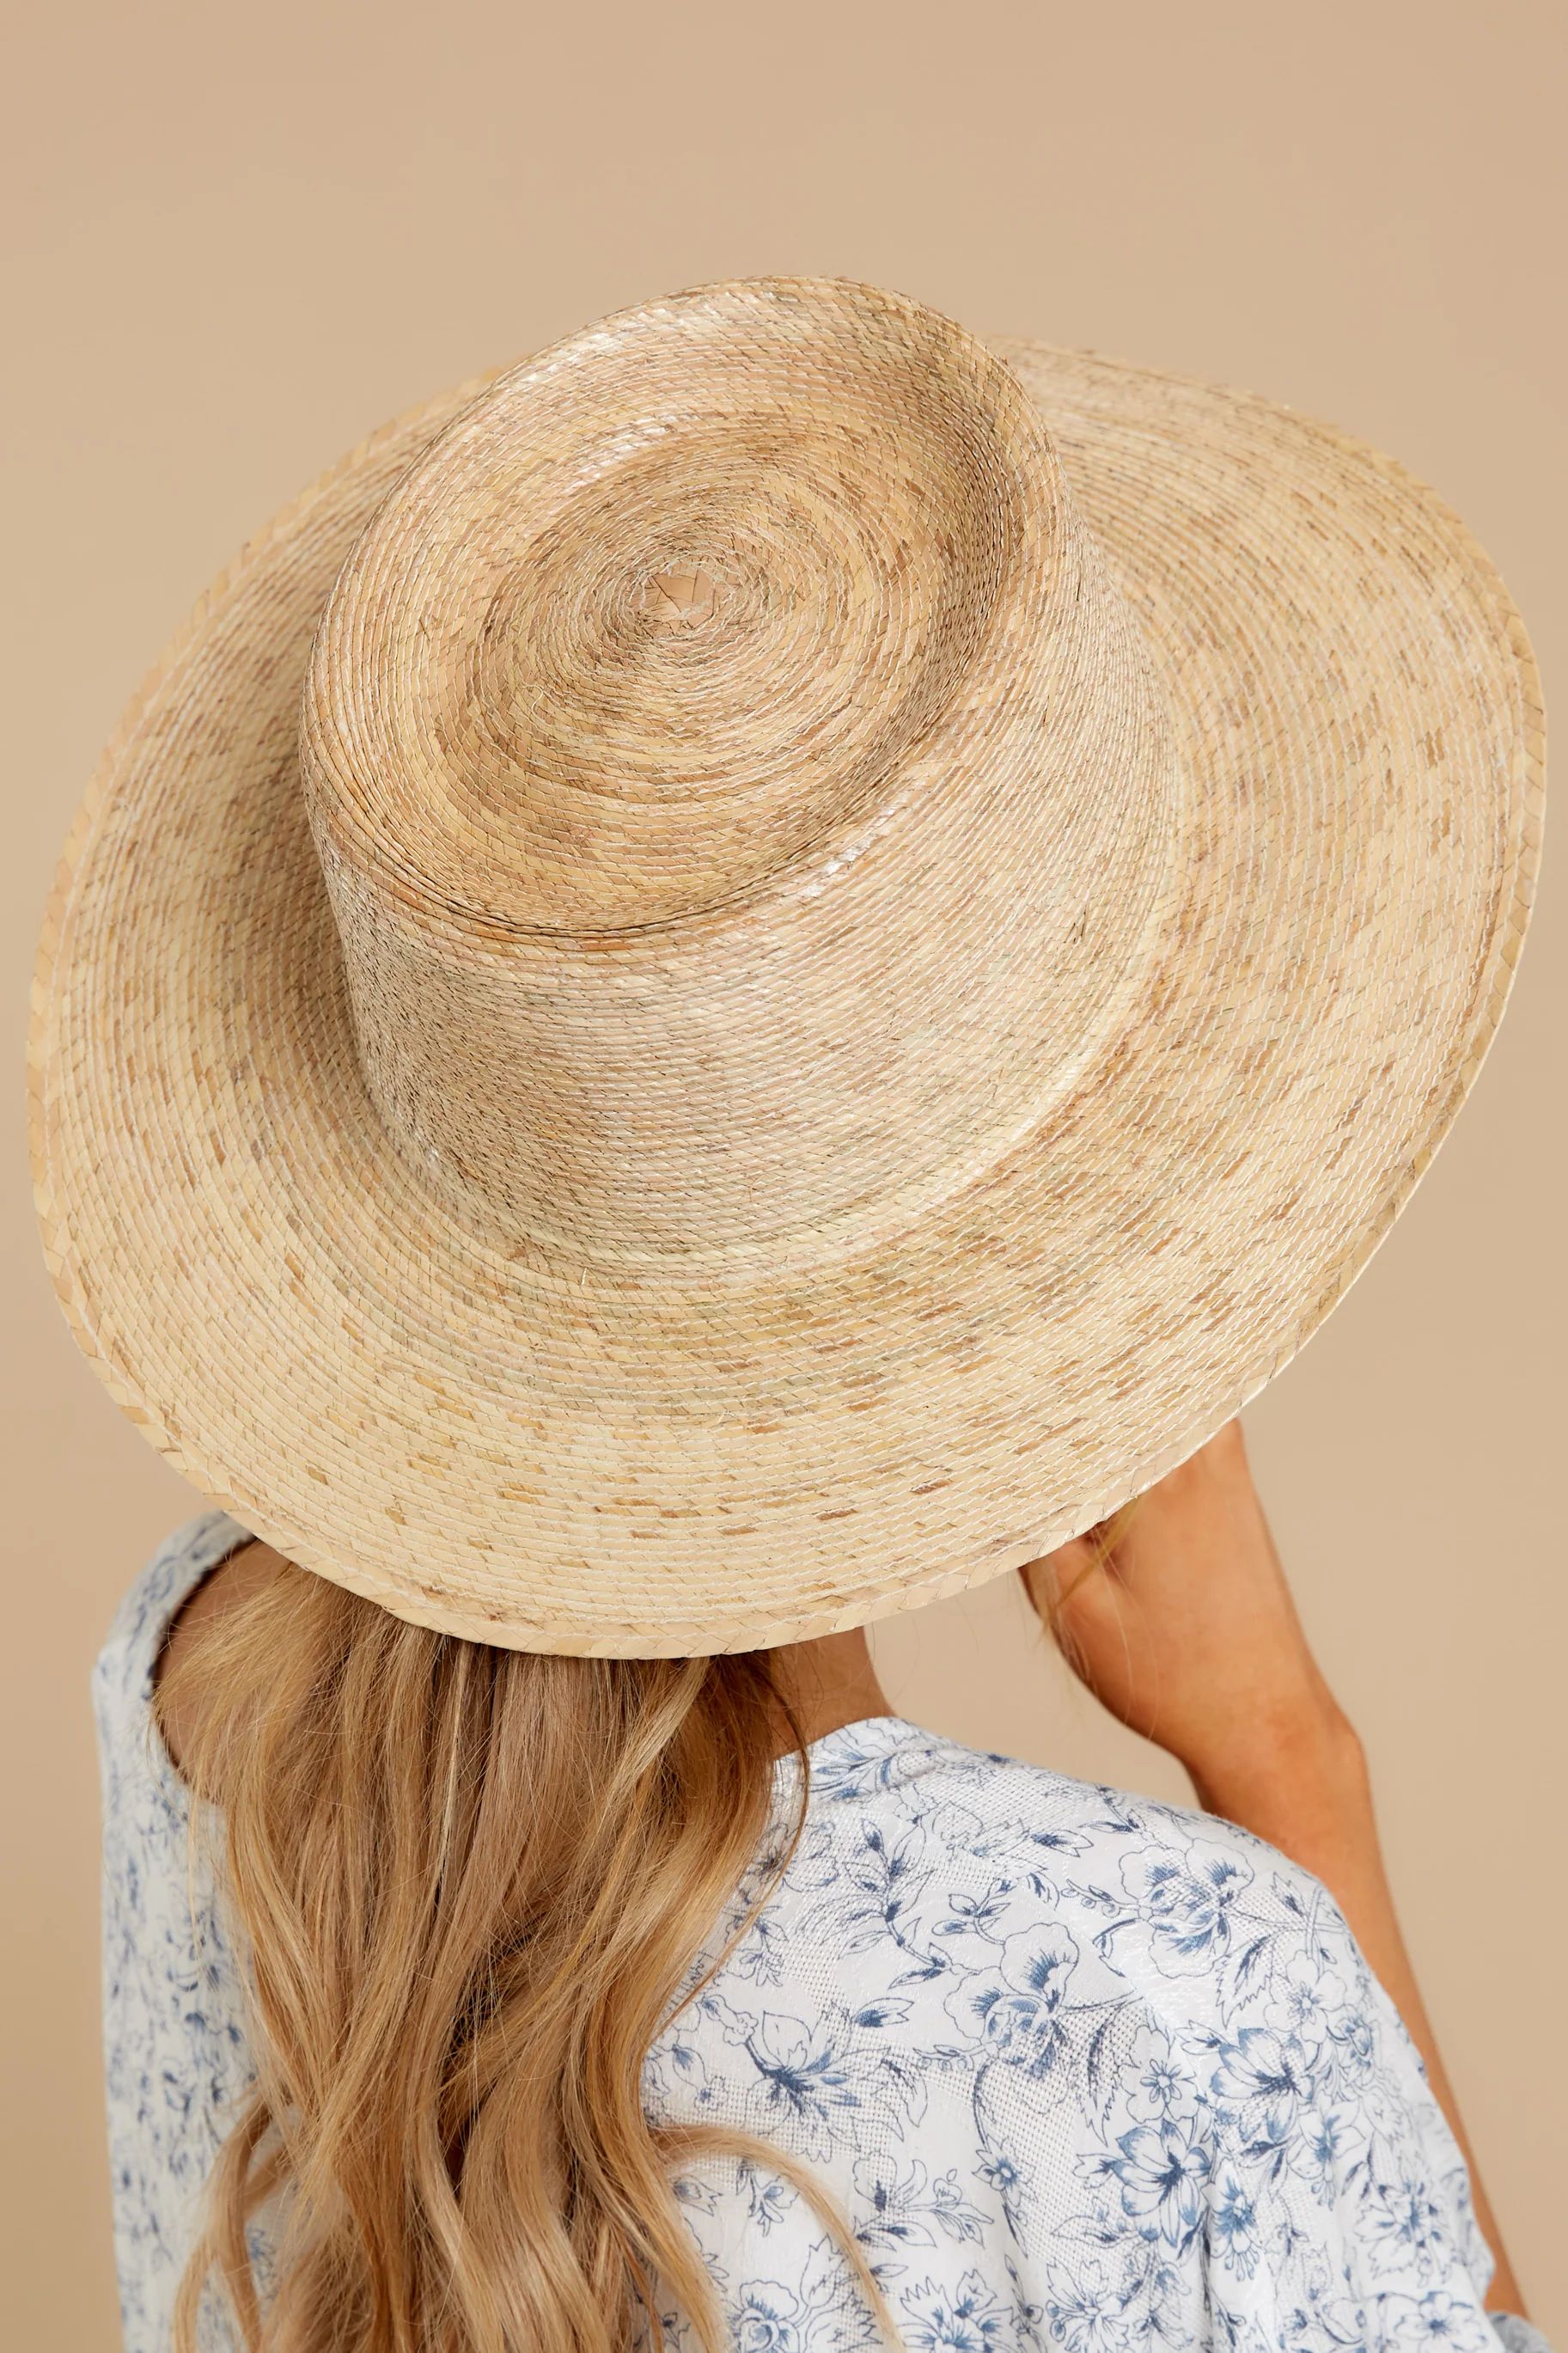 Palma Natural Boater Hat | Red Dress 